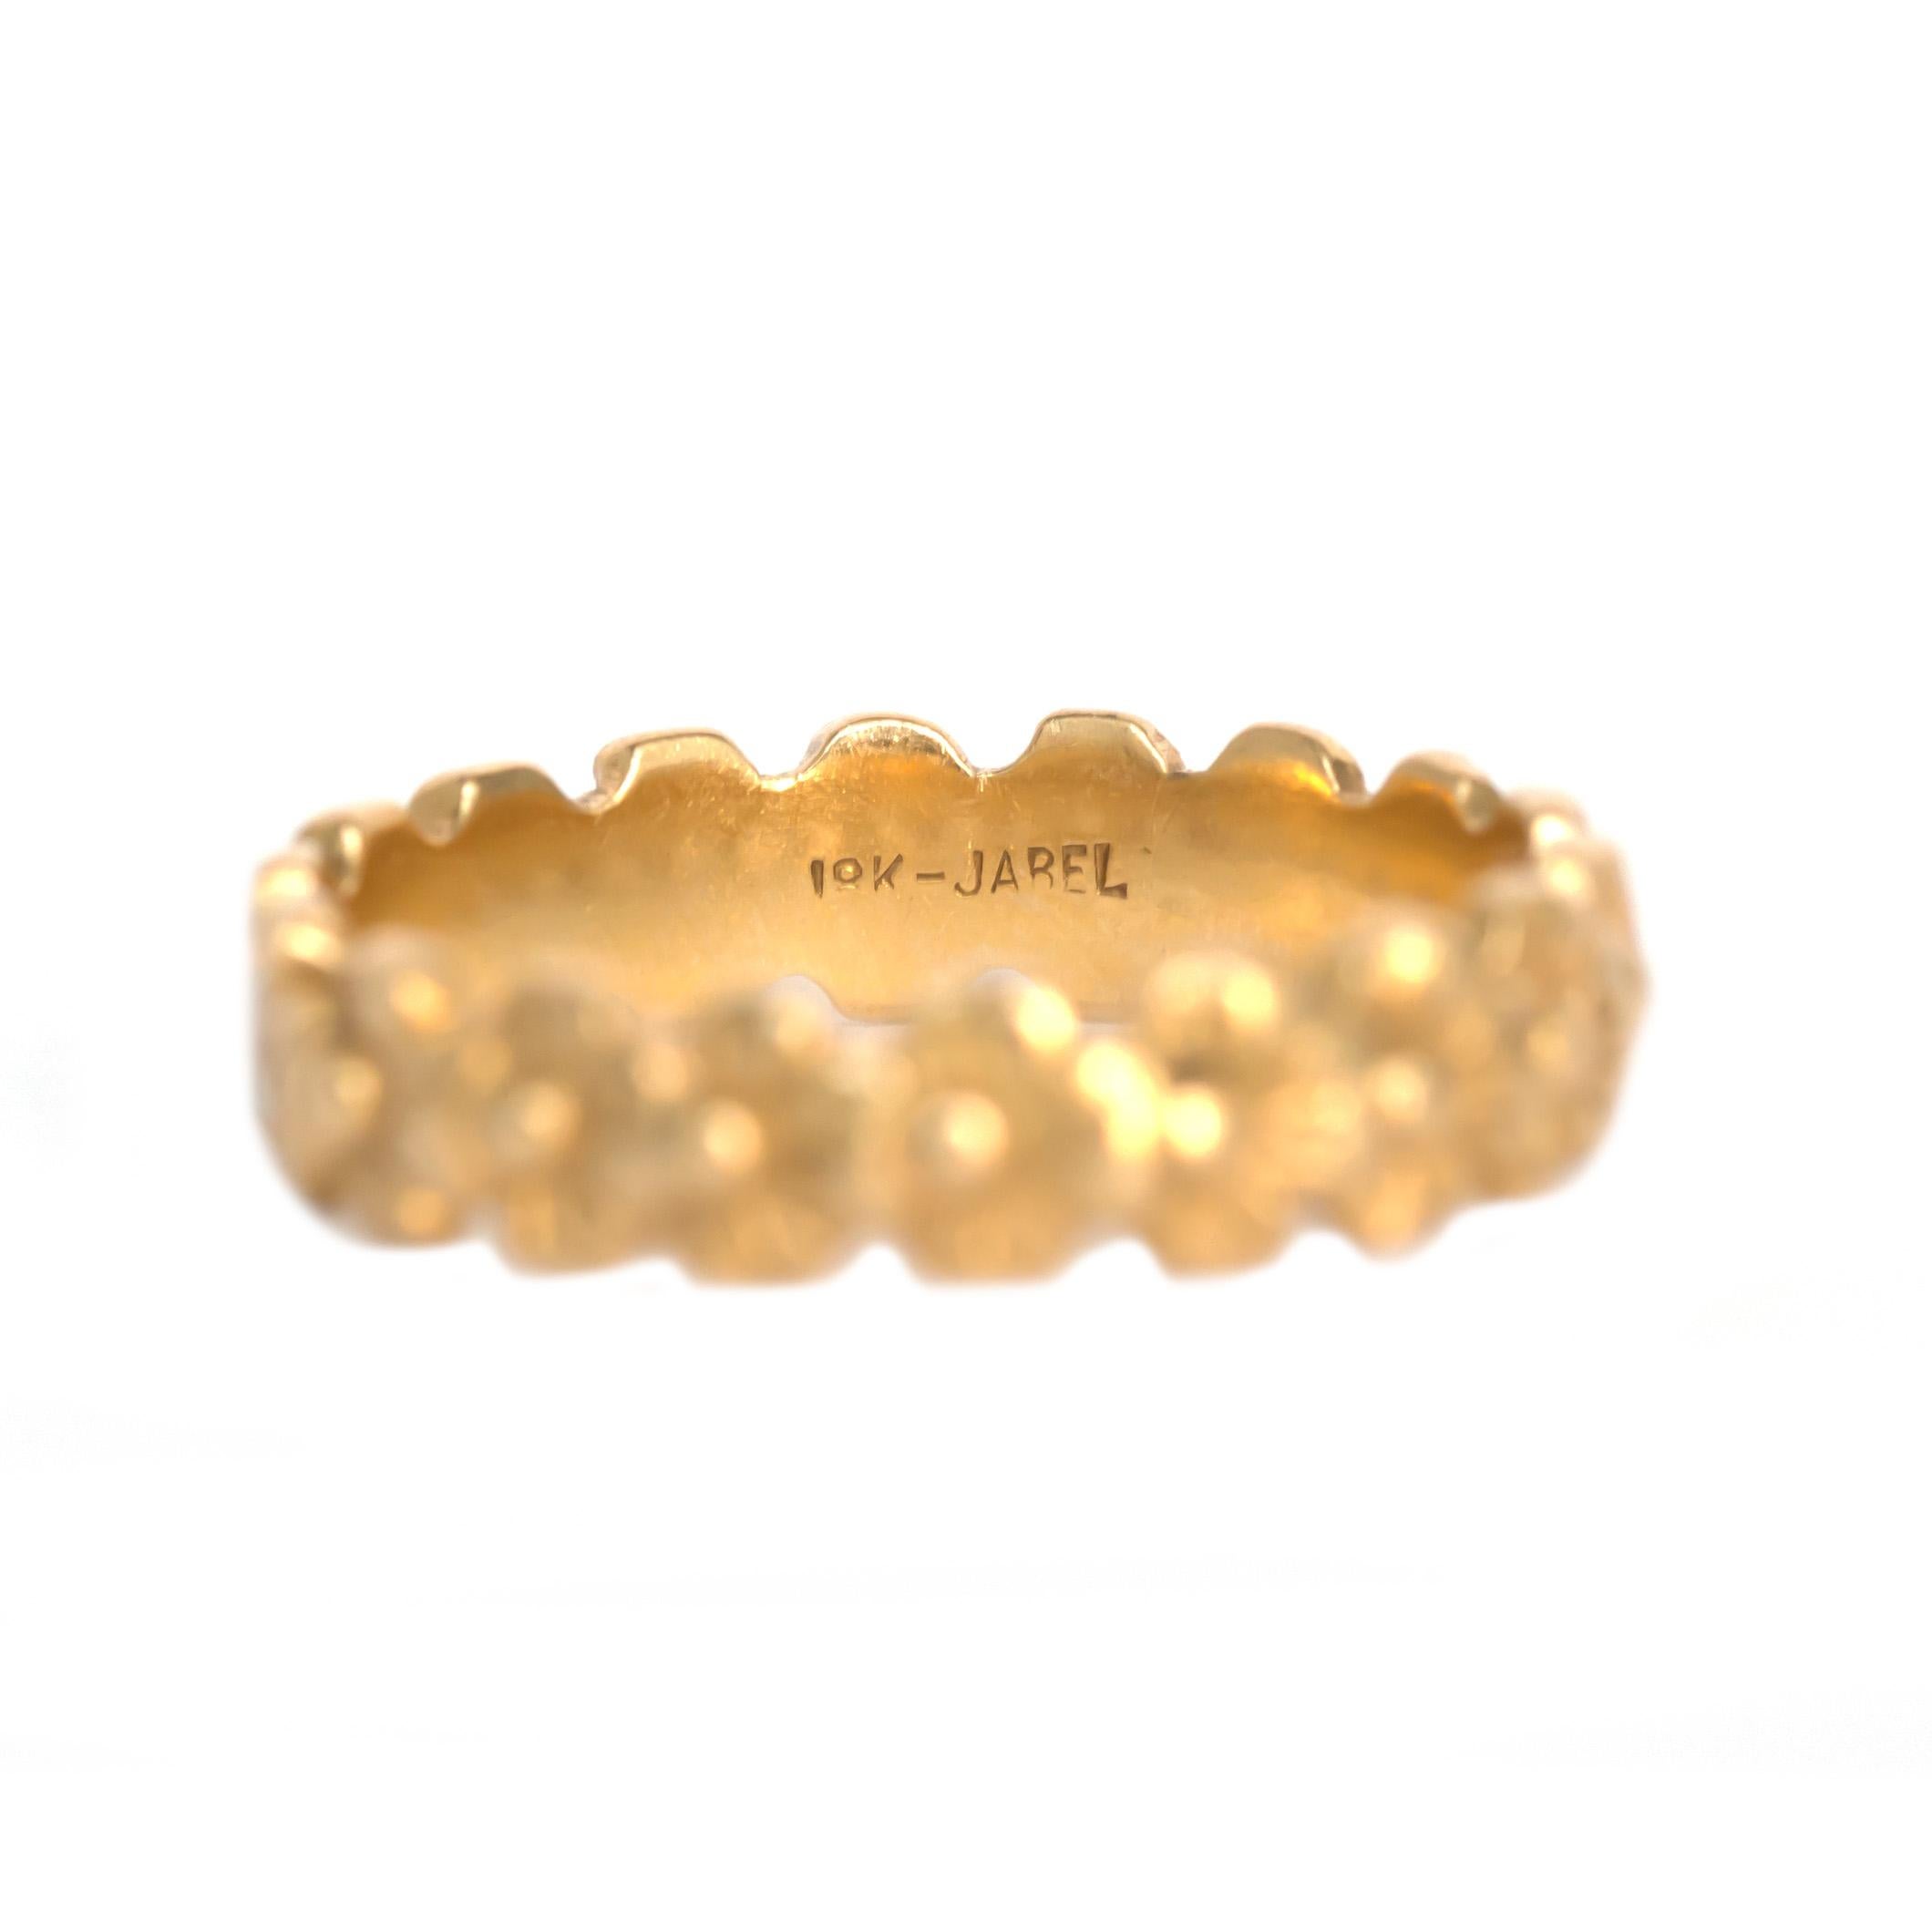 Designer: JABEL

Item Details: 
Ring Size: 6.25
Metal Type: 18 karat Yellow Gold [ Hallmarked & Tested ]
Weight: 3.7 grams

Width: 4.5mm 
Finger to Top of Stone Measurement: 1.6mm
Condition: Very Good 